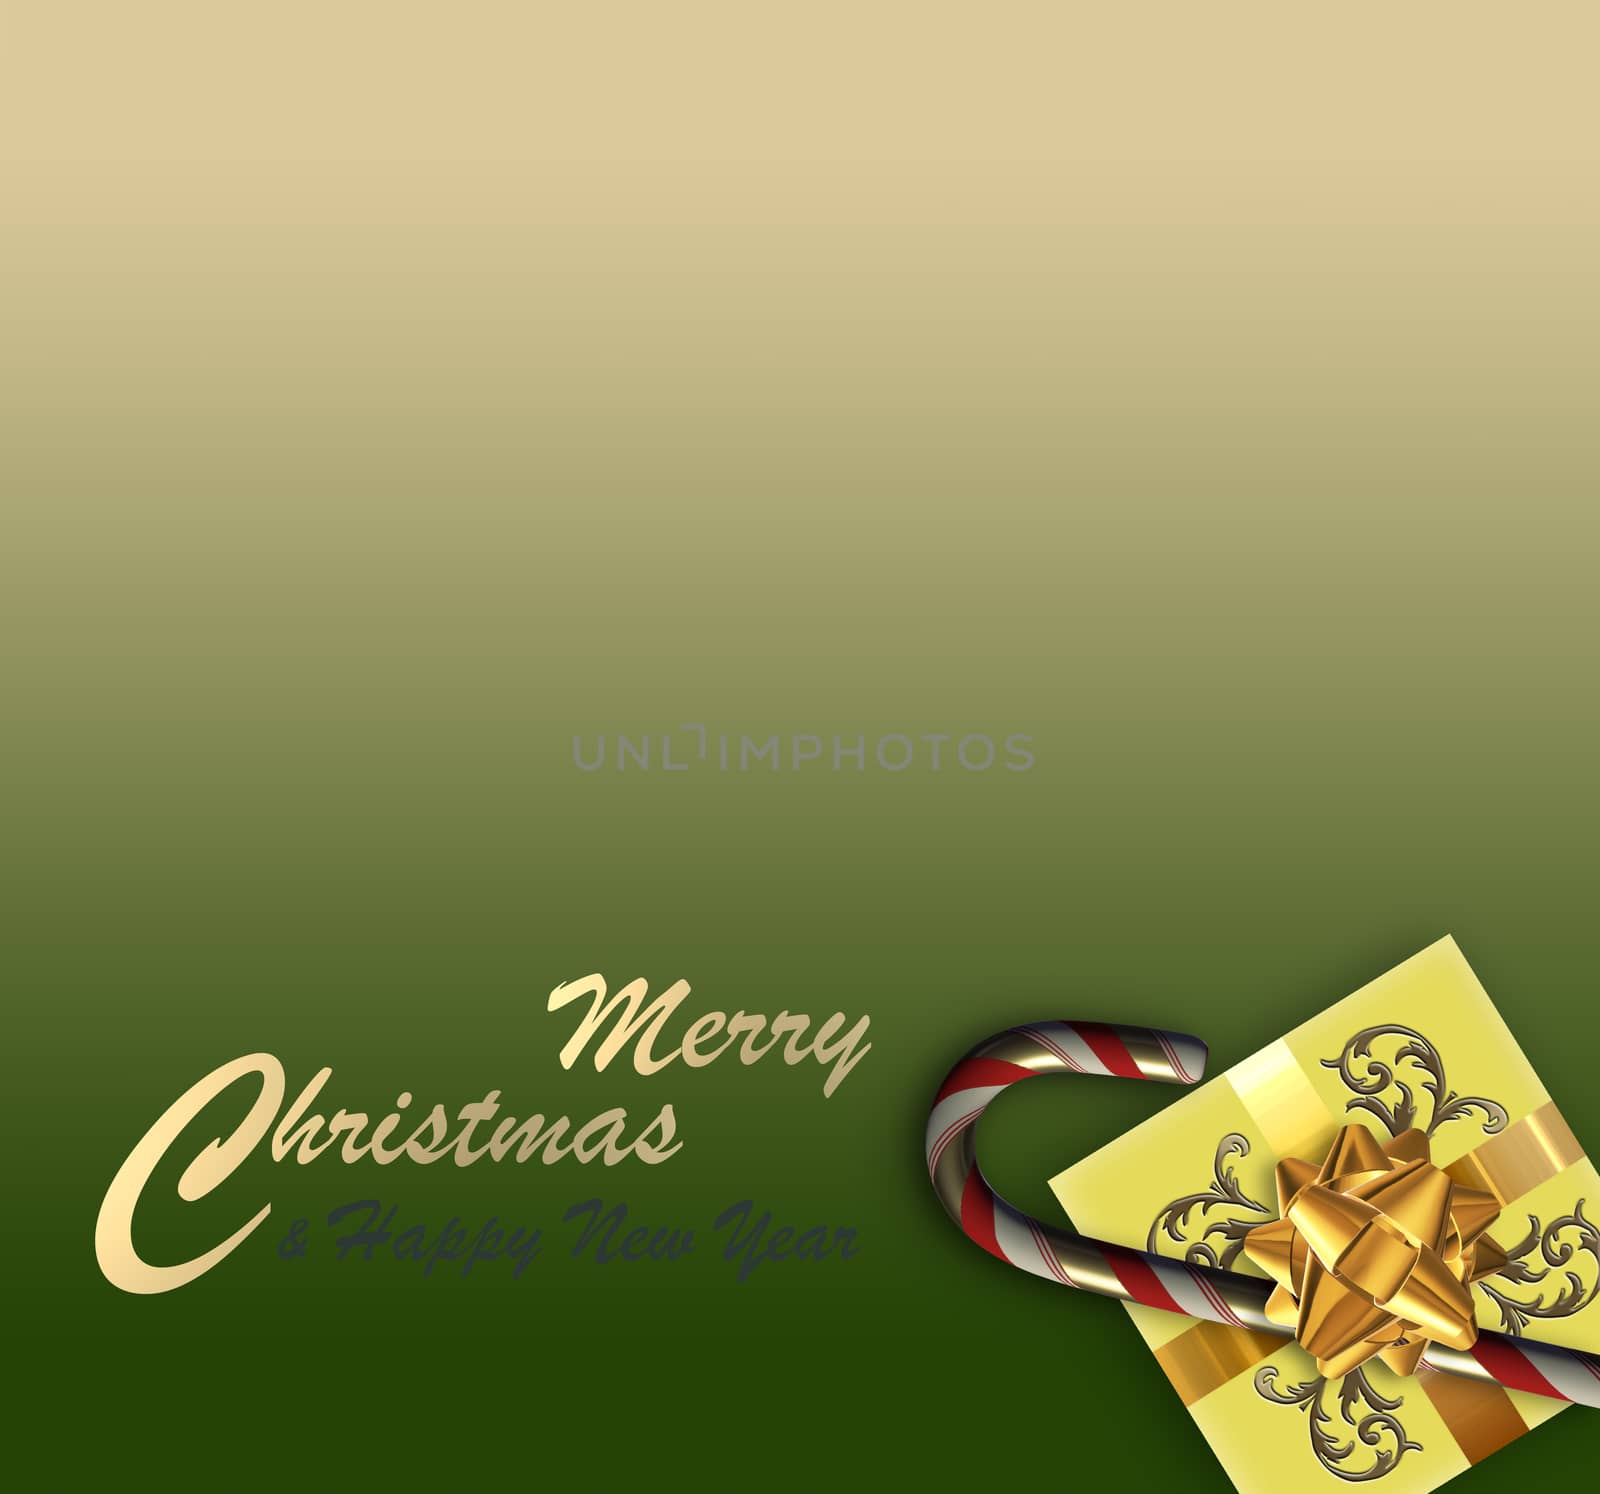 Merry Christmas design with realistic Xmas gift box and candy cane on green background. Gold text Merry Christmas Happy New Year. 3D render. Place for text